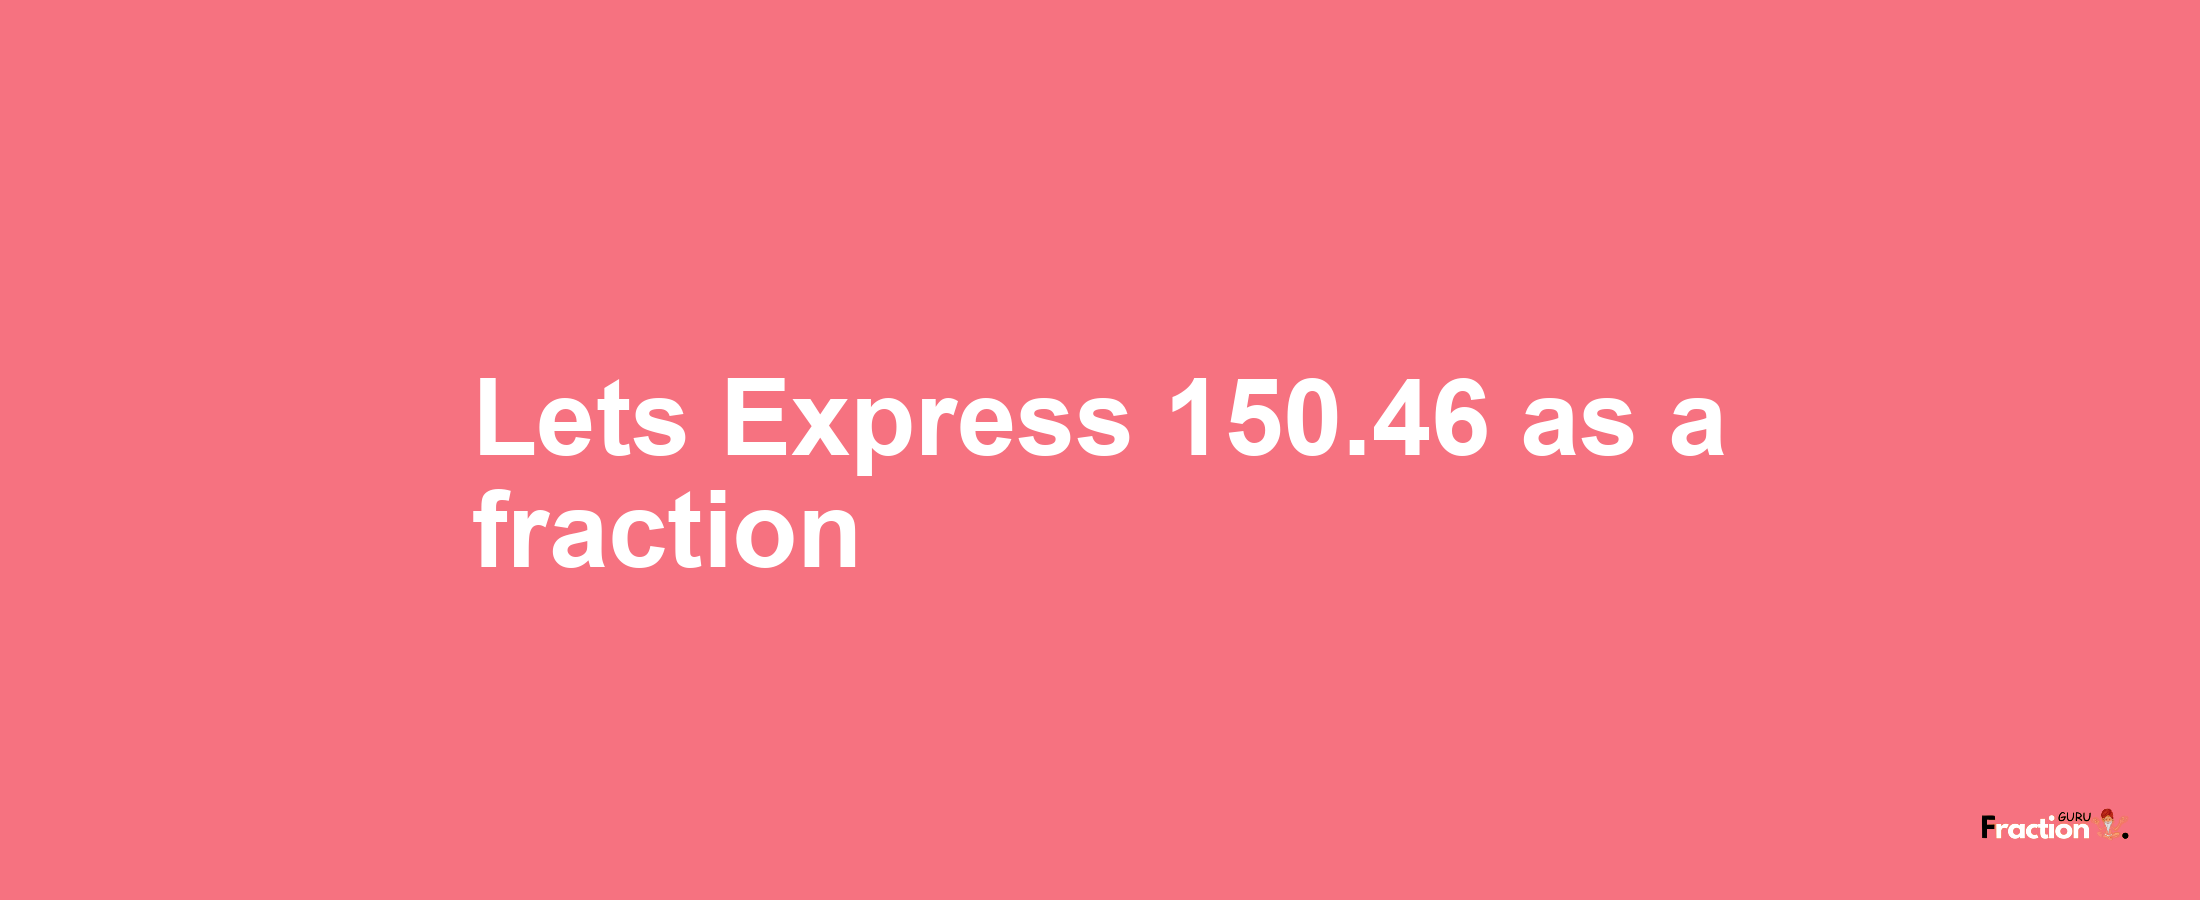 Lets Express 150.46 as afraction